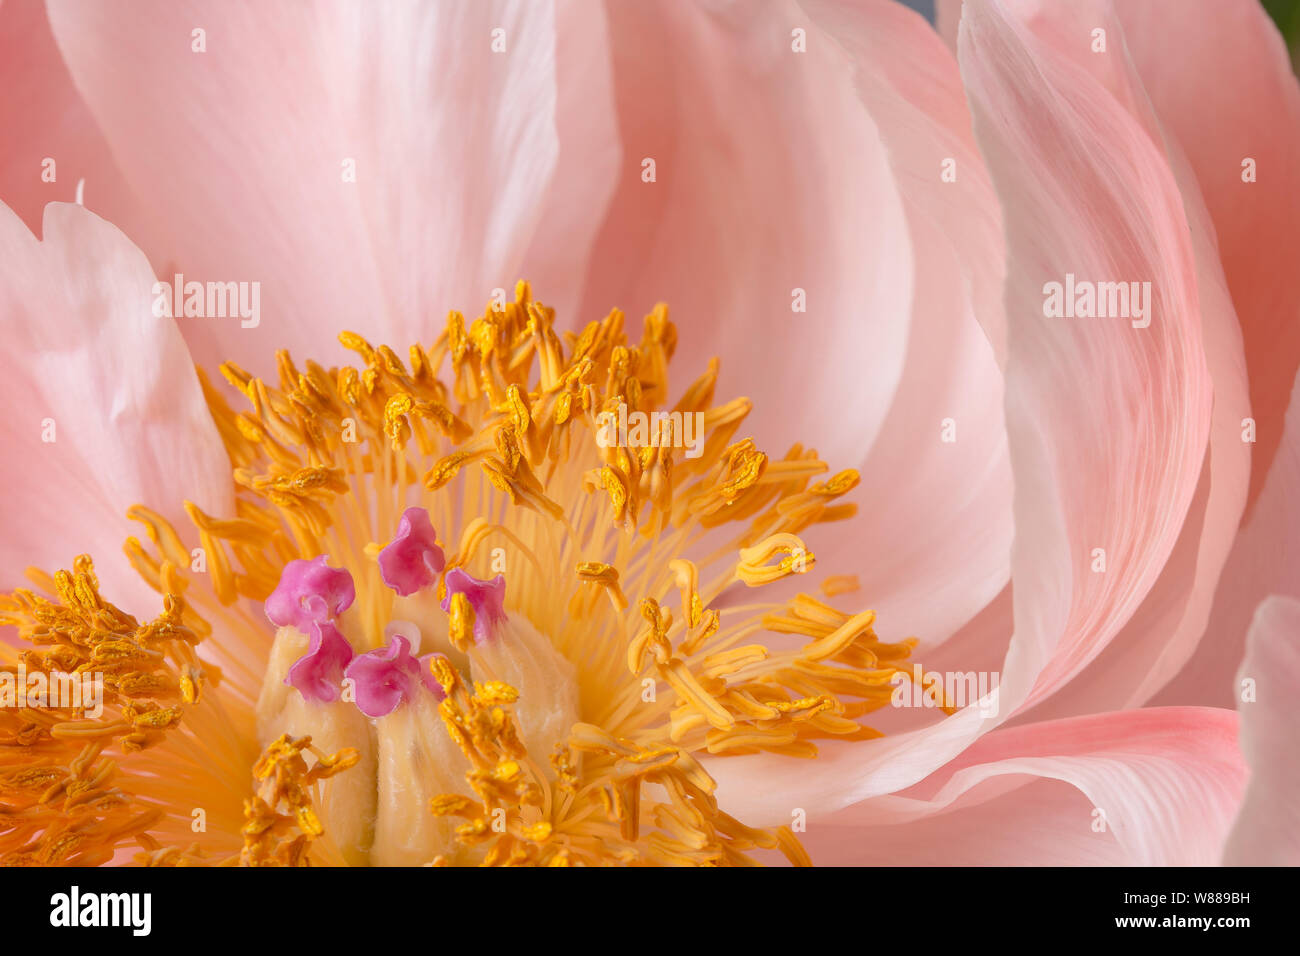 Pink peony flower in bloom with yellow pistils macro still Stock Photo